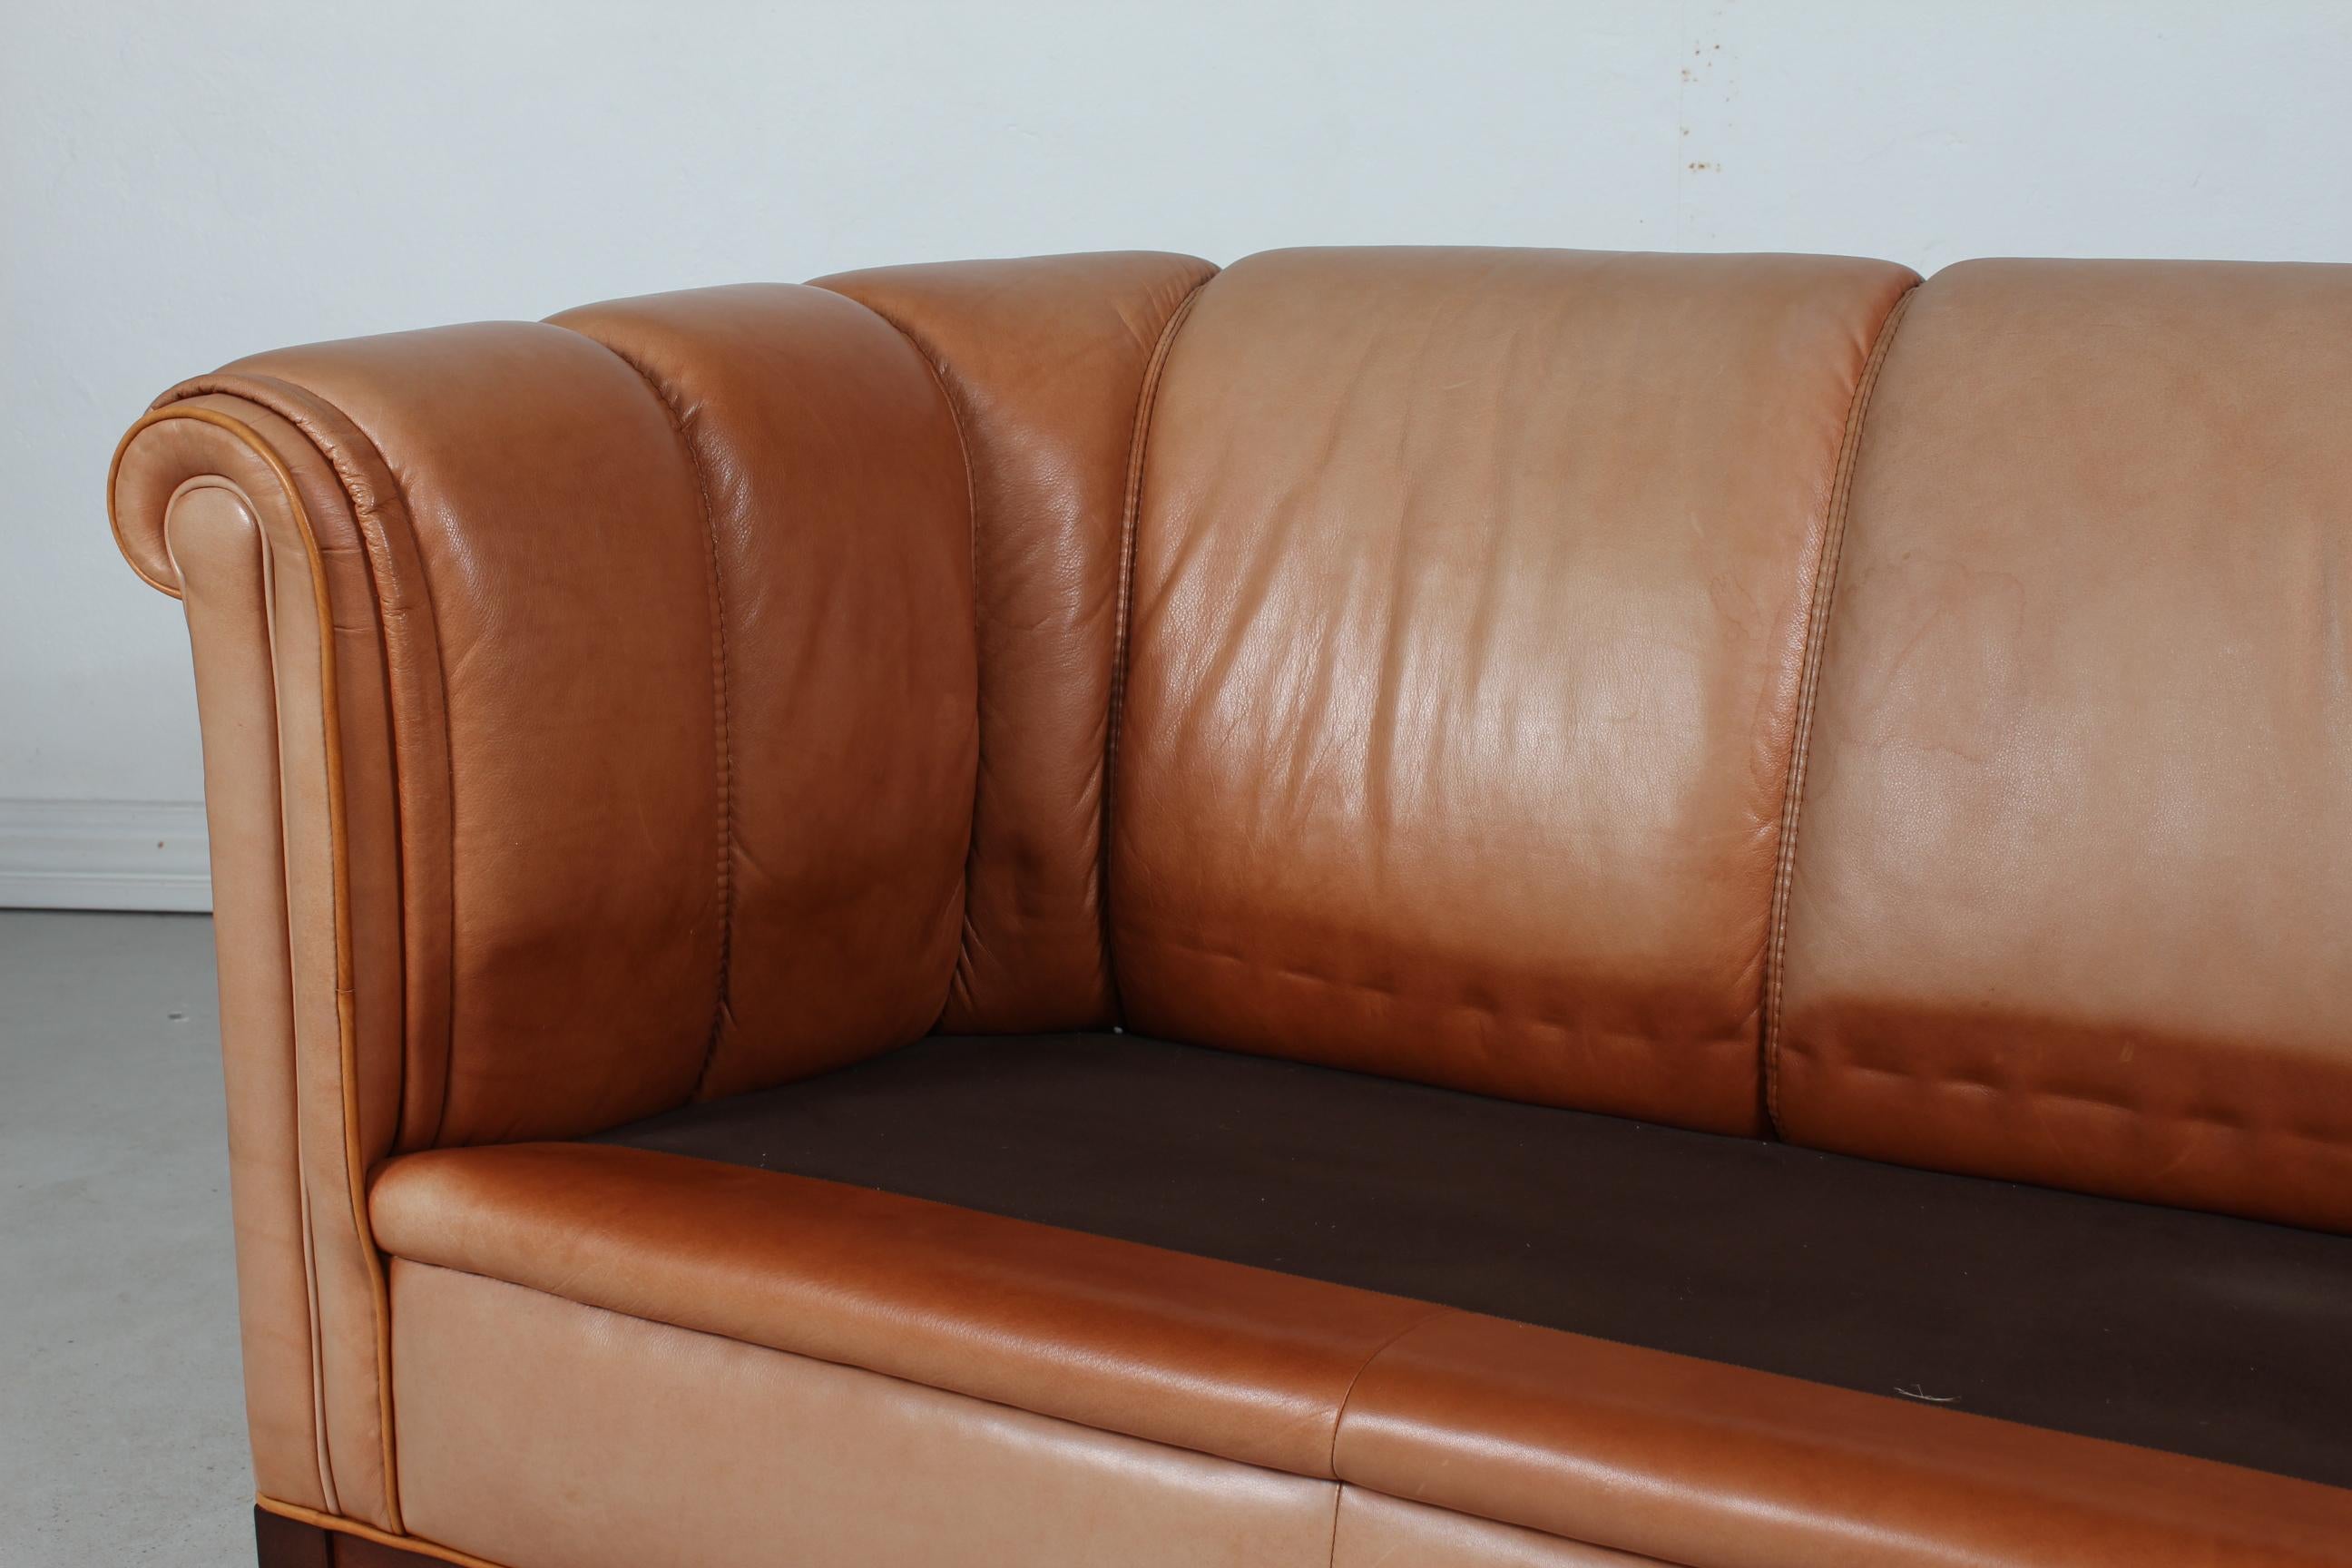 Vintage Chesterfield Sofa and Couch Cognac Leather and Mahogany Frame, 1970s For Sale 5